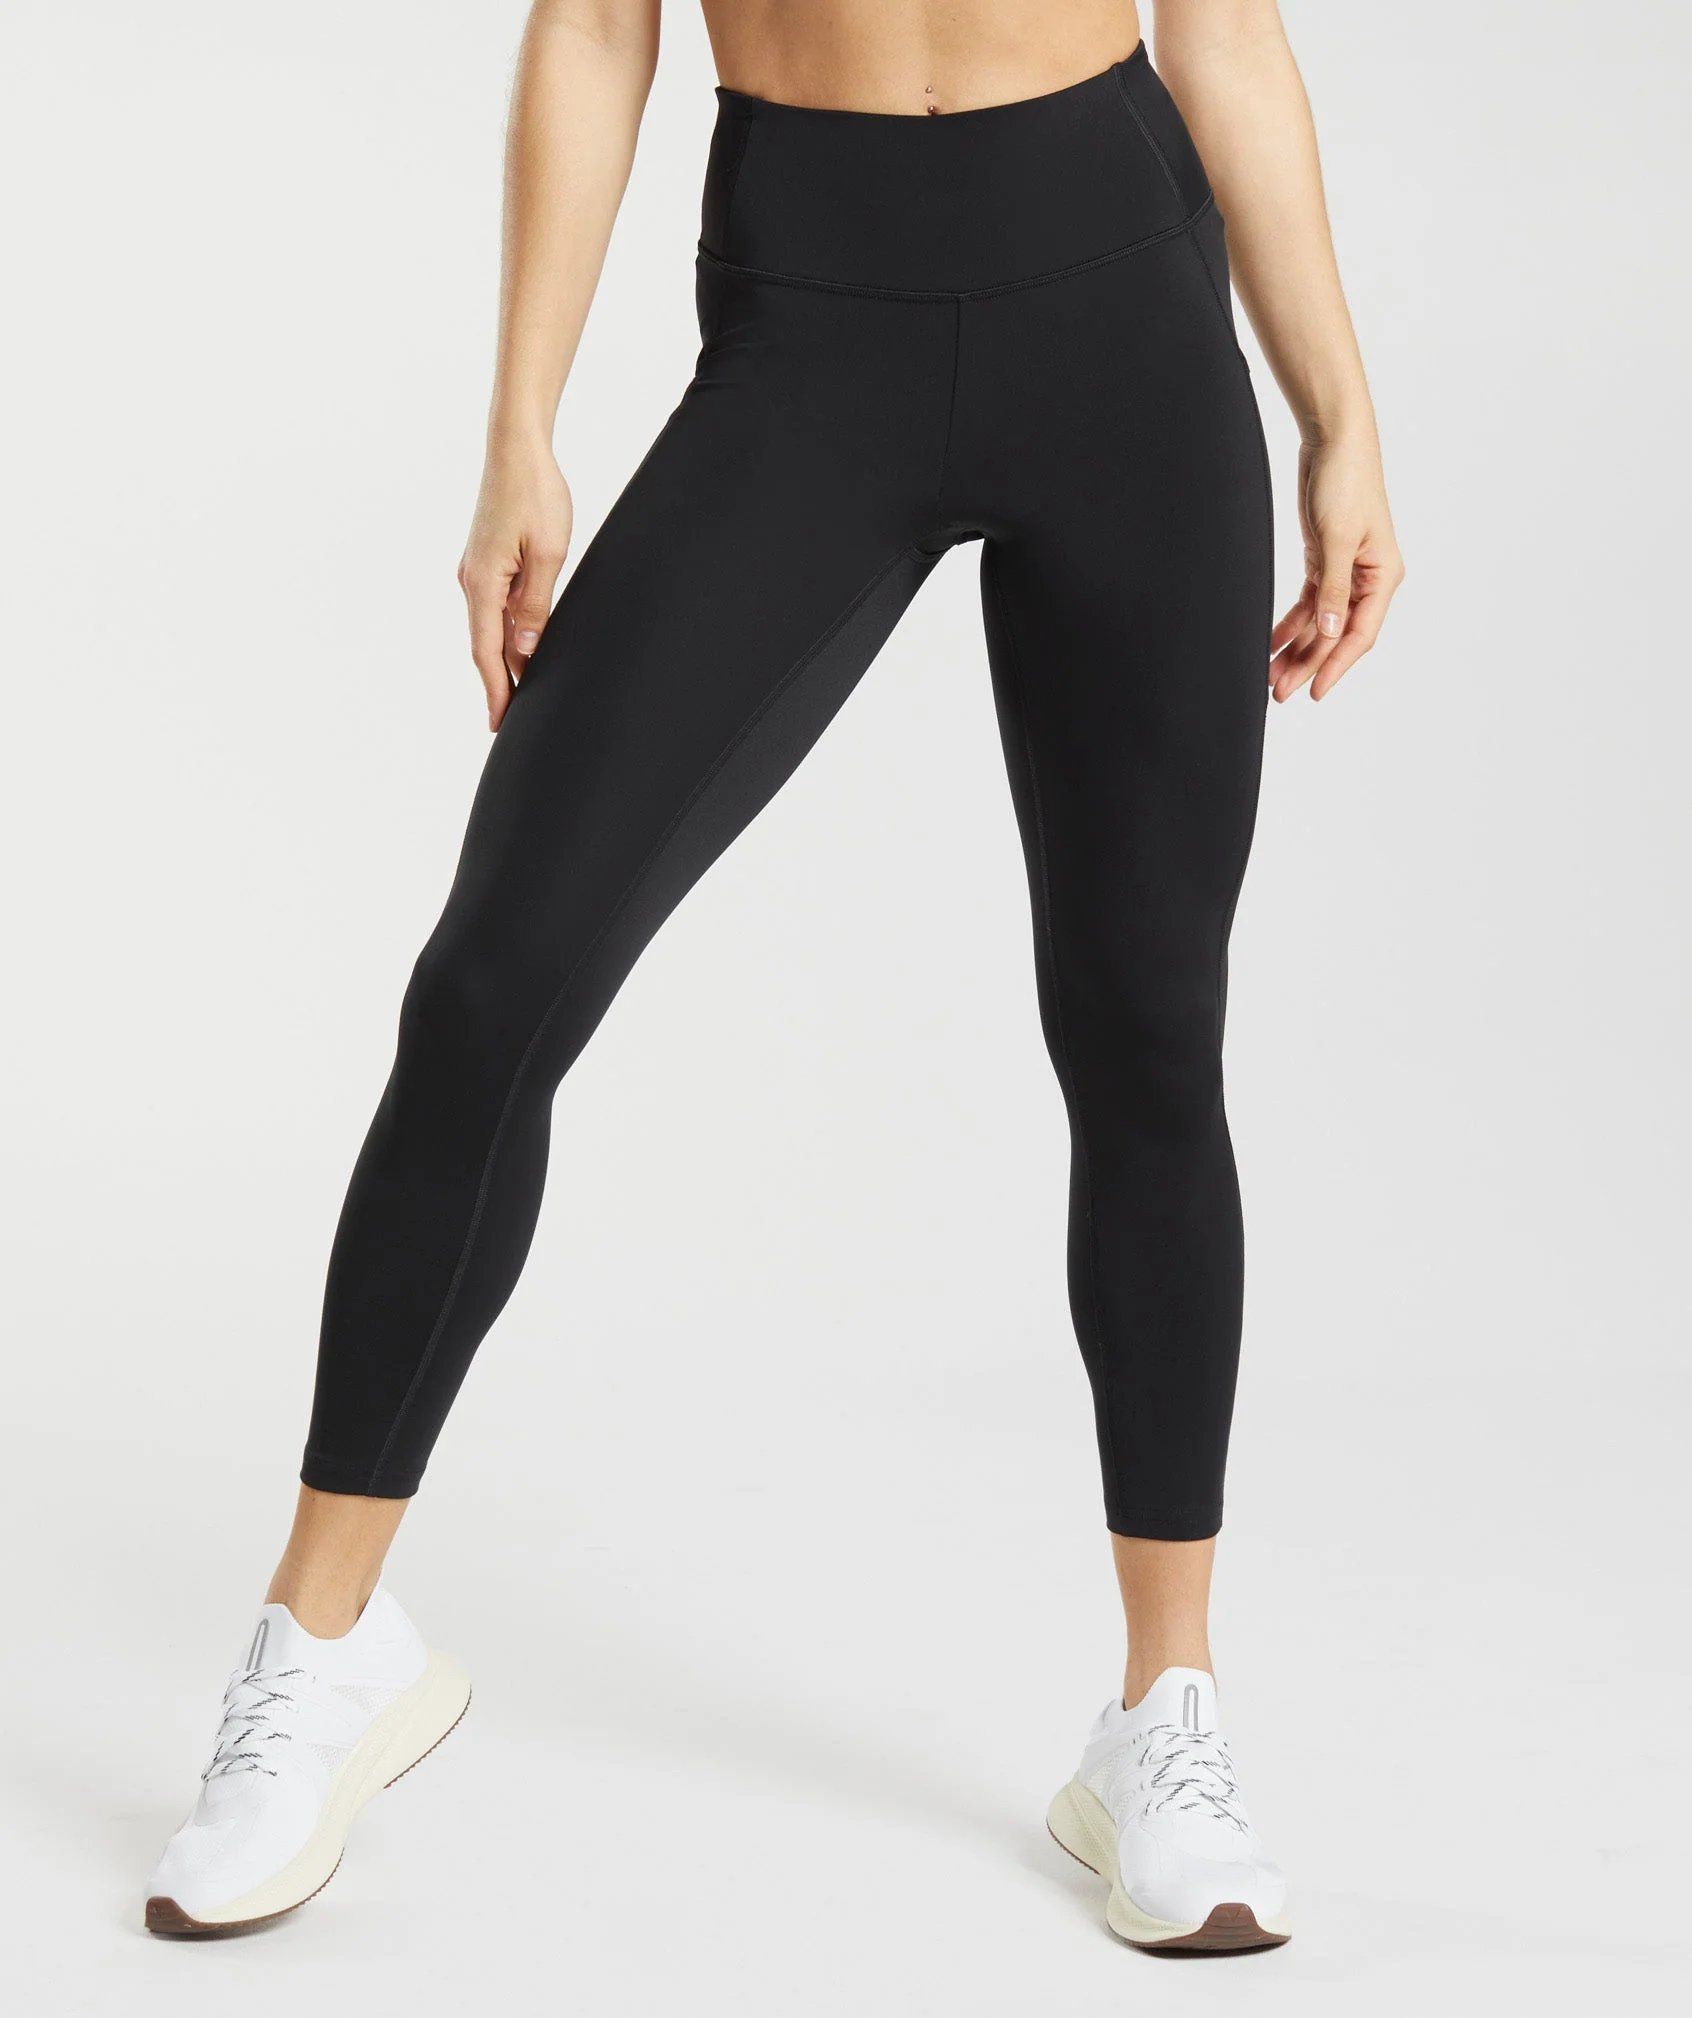 12 Best Workout Leggings of 2023, Tested by Experts